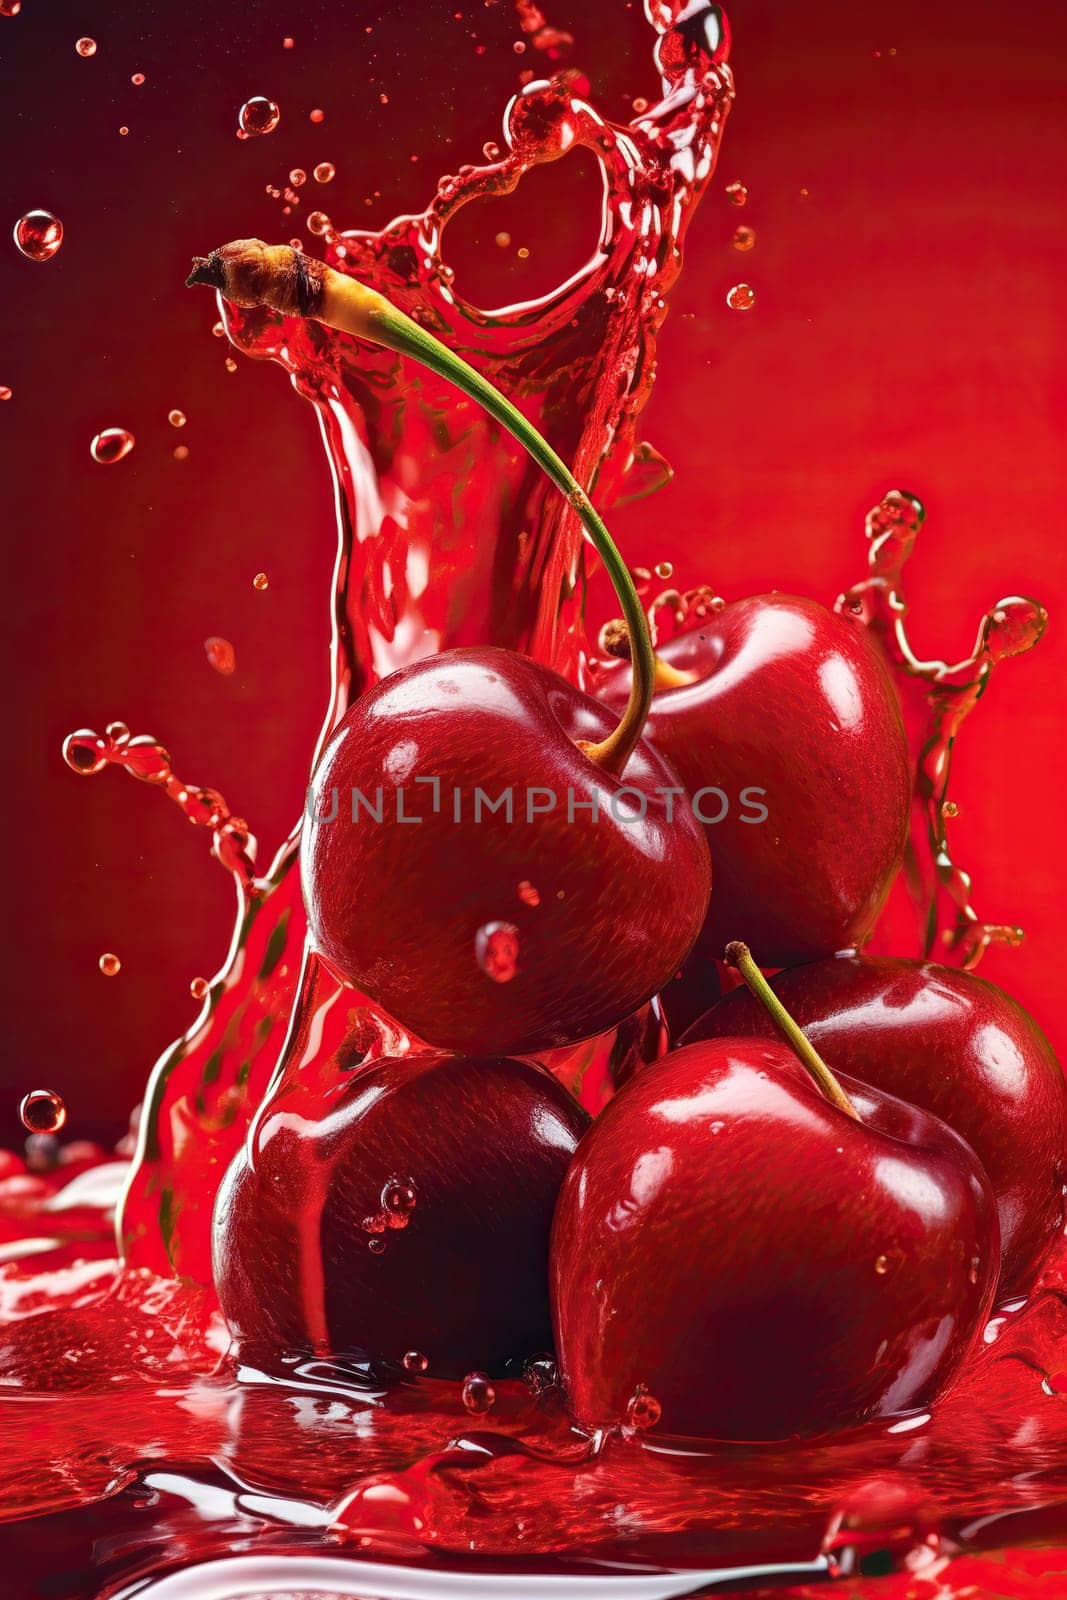 Fresh Cherry With Drops And Splashes Of Juice by tan4ikk1